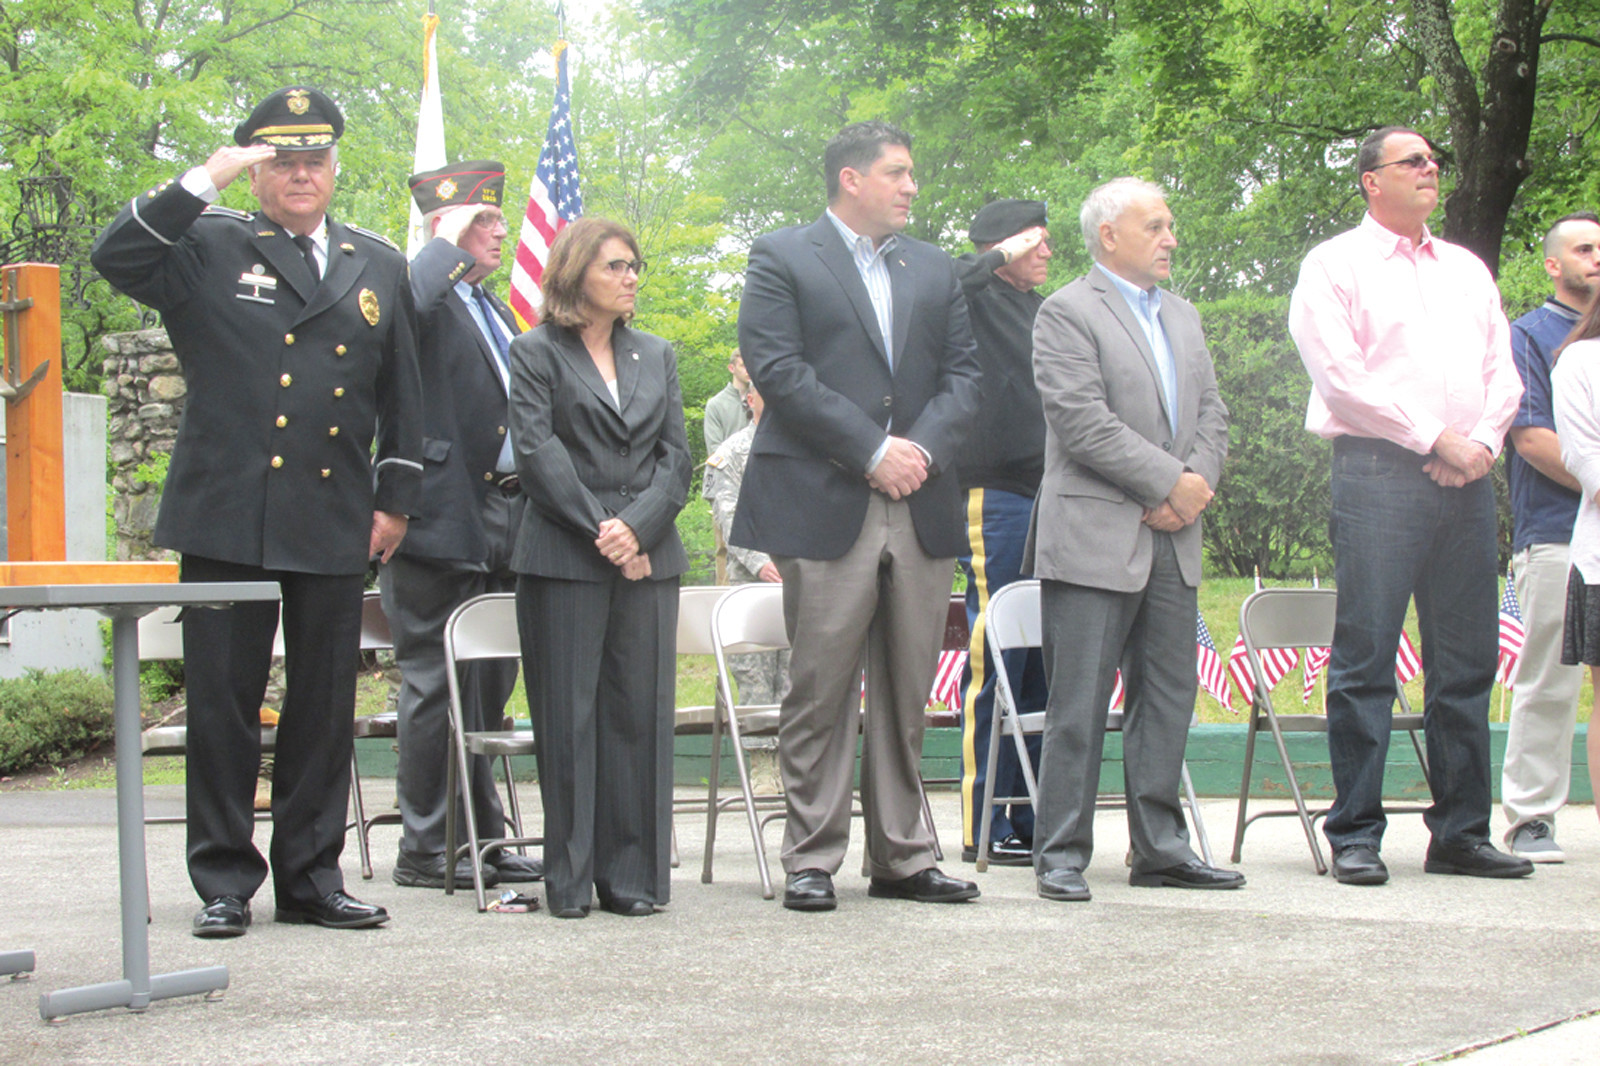 SPECIAL SALUTE: As Johnston Police Chief Richard S. Tamburini salutes the flag during the National Anthem, town officials stand  amid military personnel and impressive monuments of deceased Johnston veterans who helped preserve the nation’s freedom.